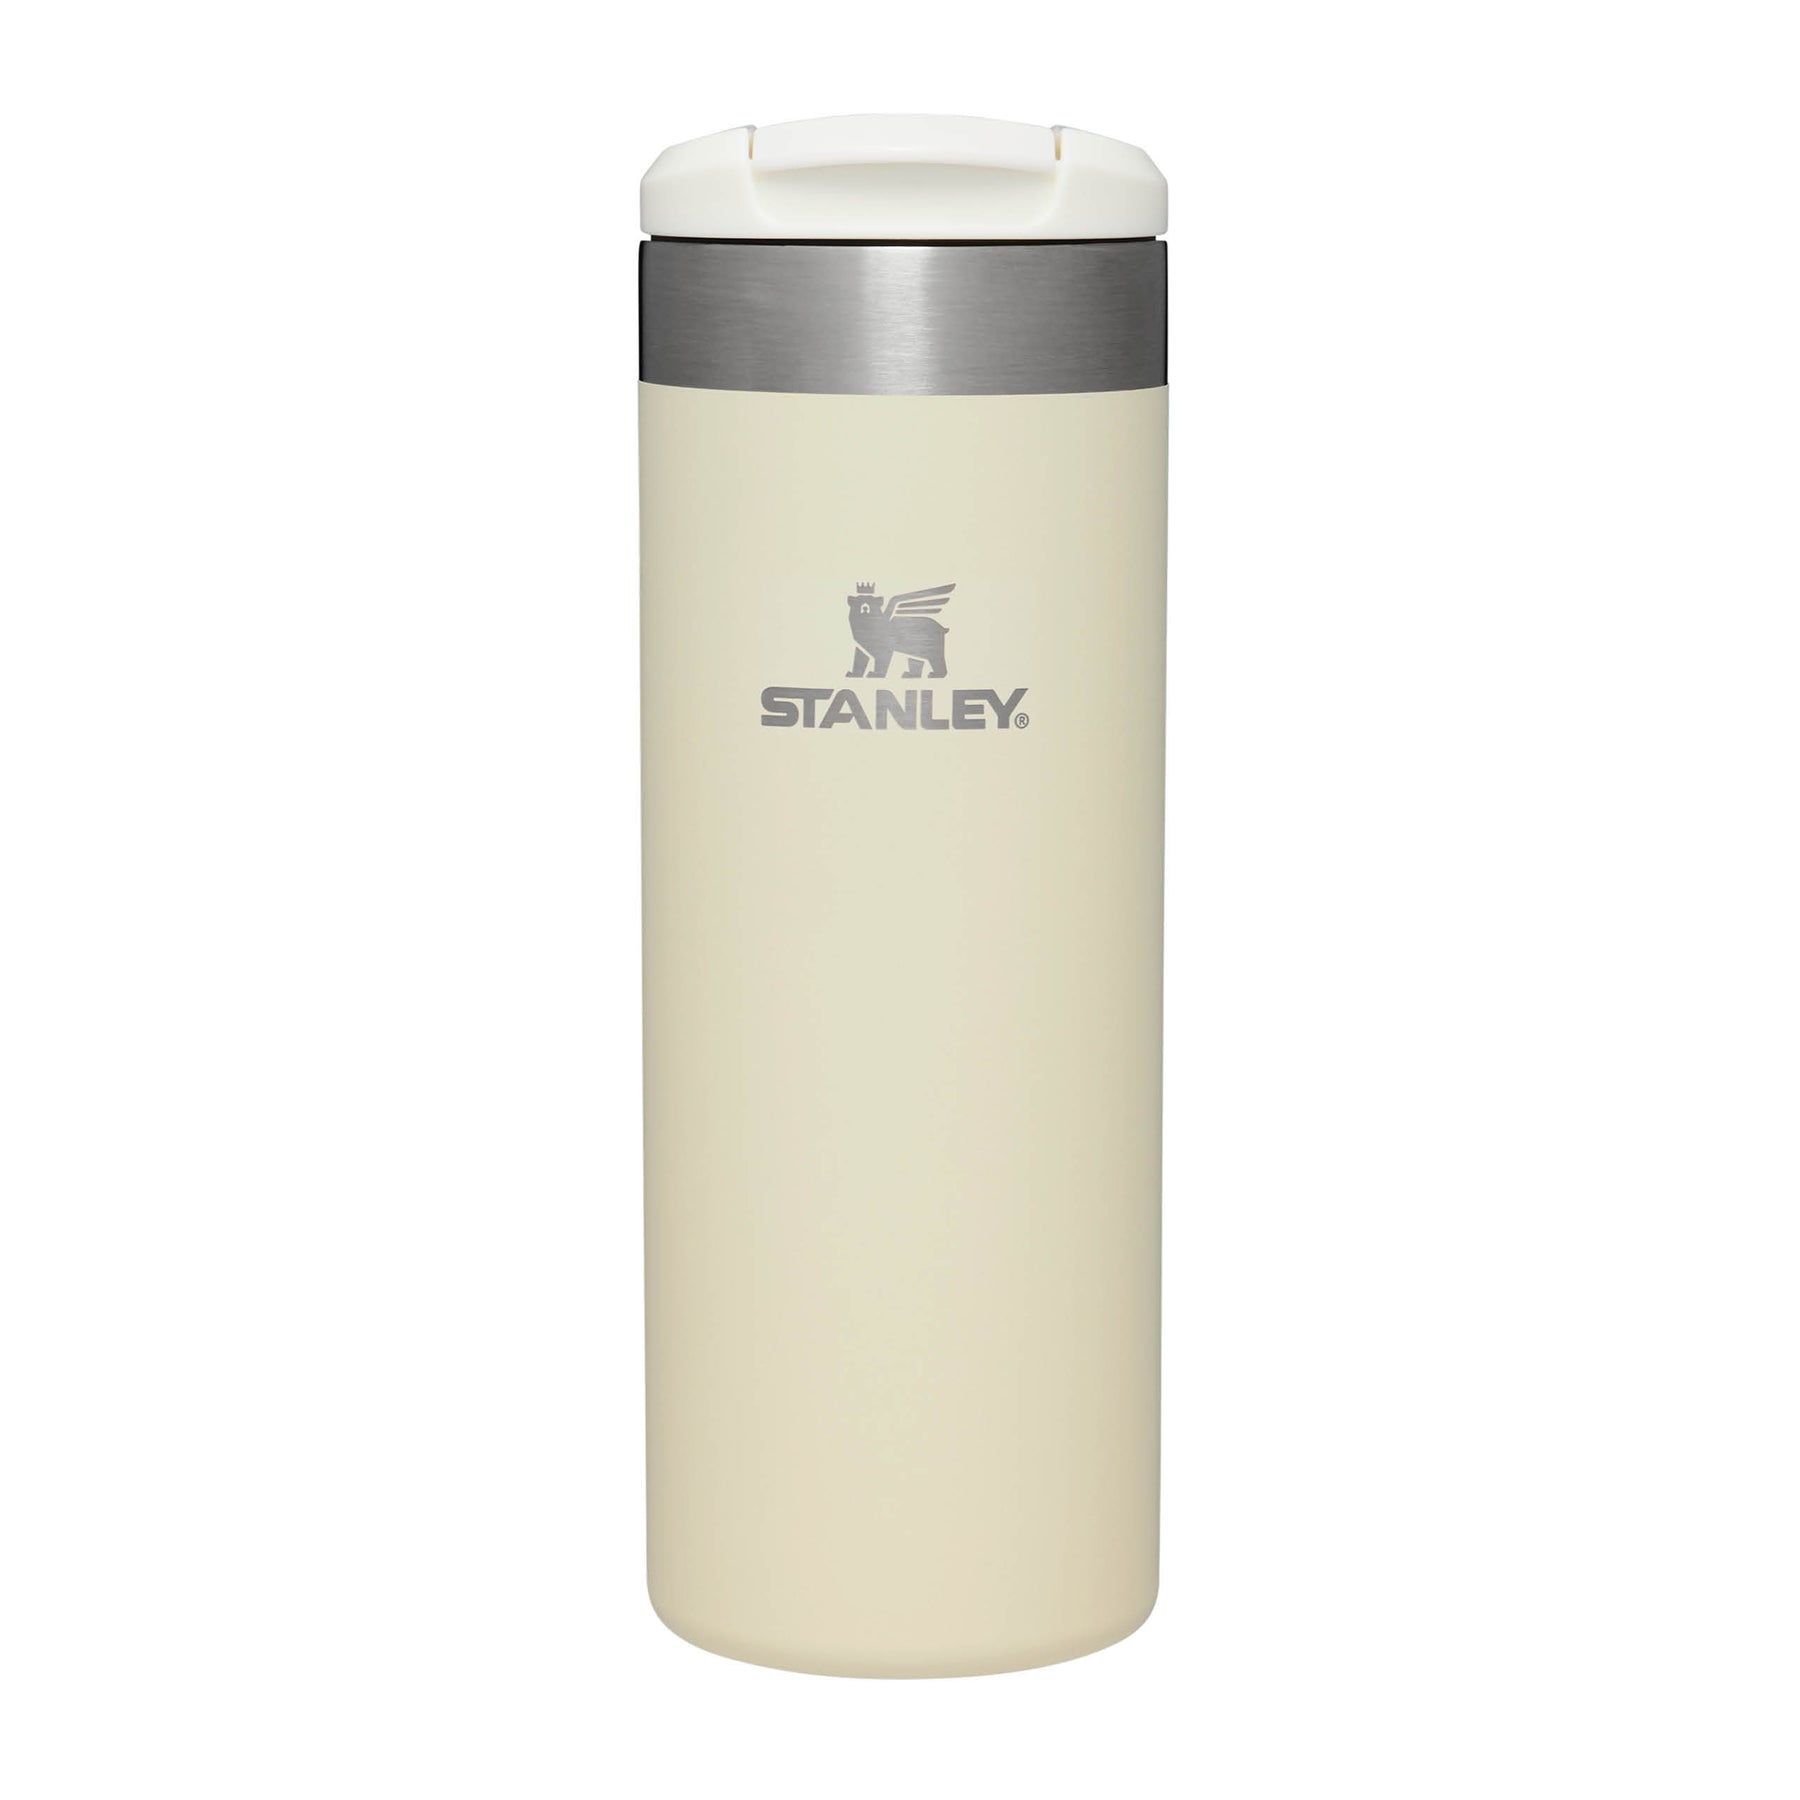 Stainless Steel Flasks, Bottles and Mugs